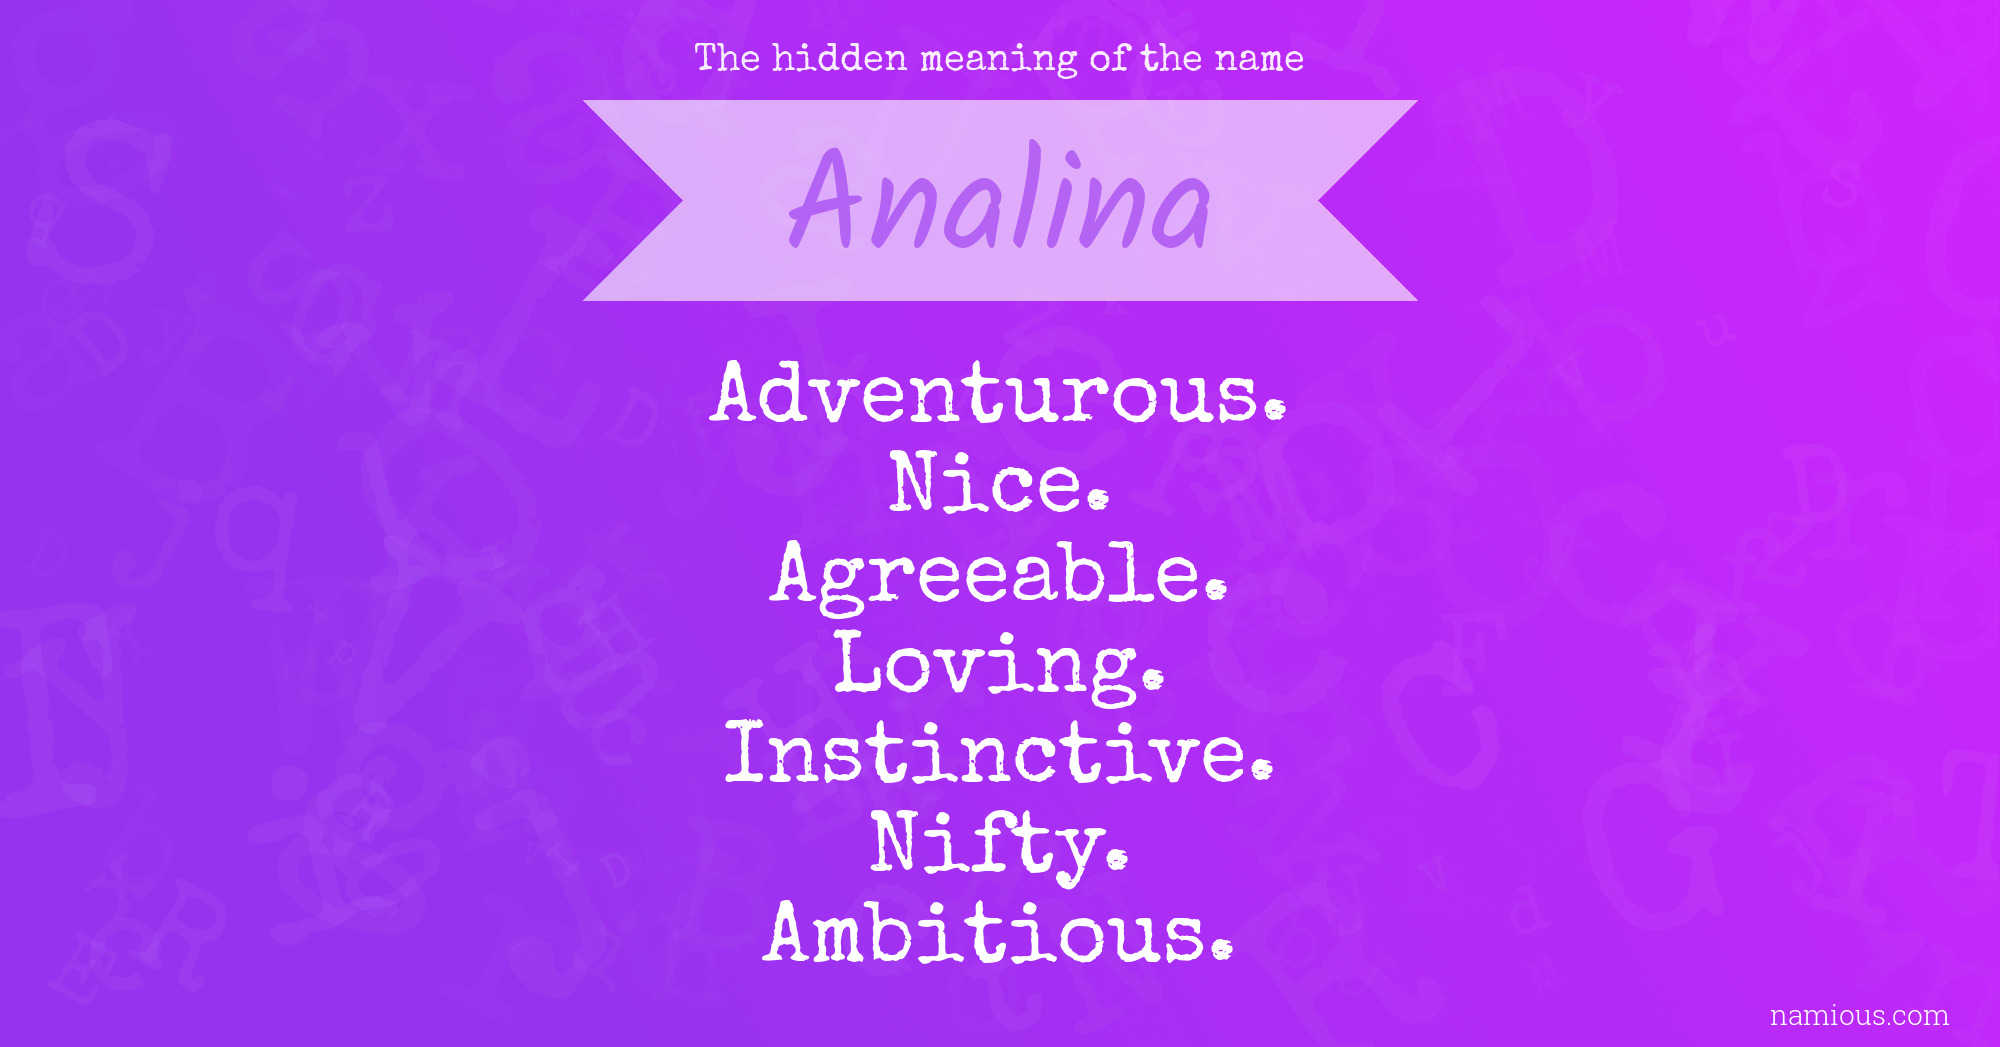 The hidden meaning of the name Analina